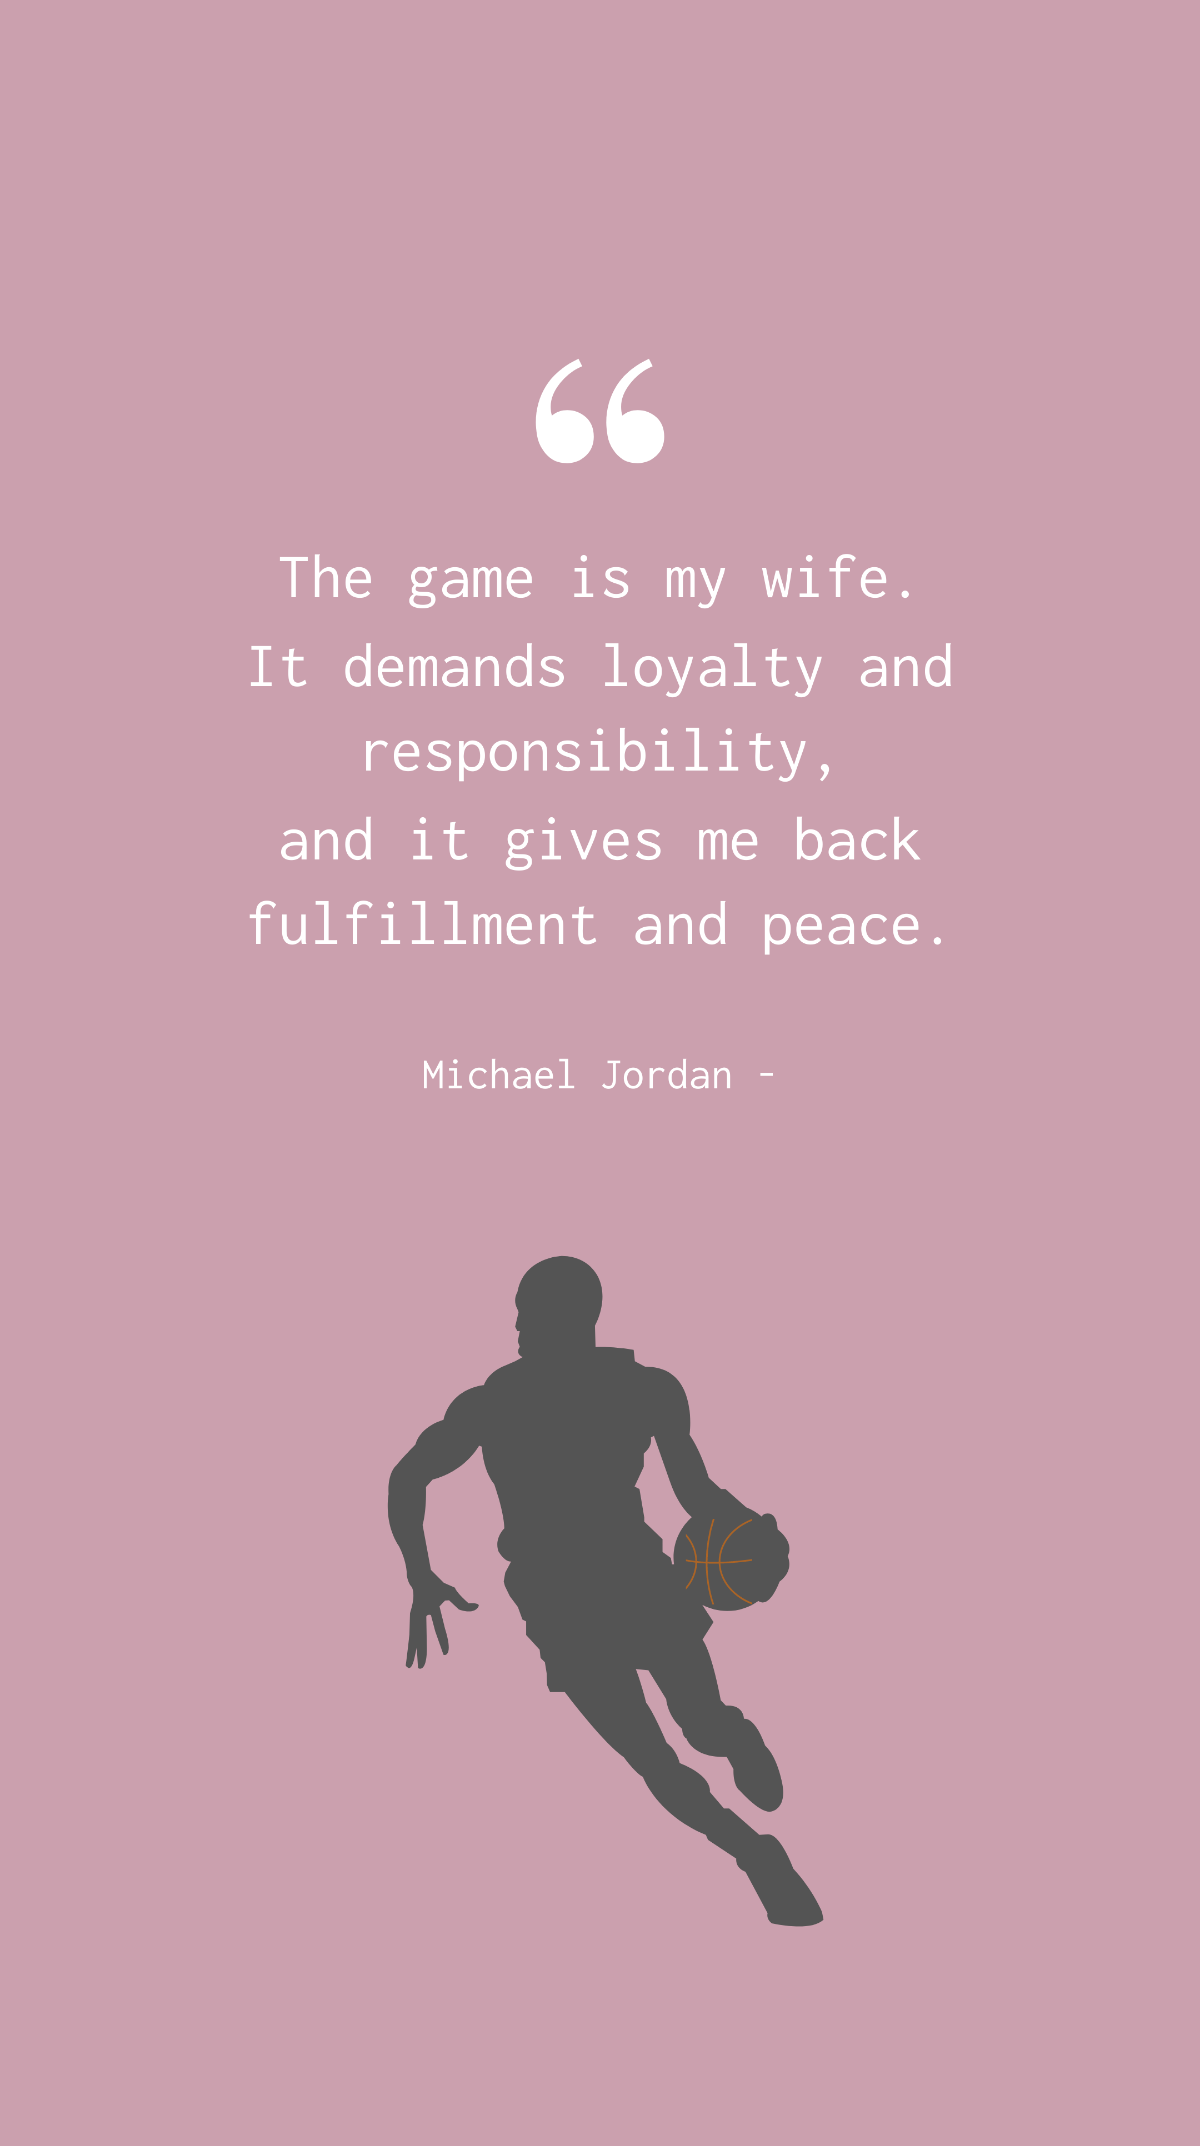 Michael Jordan - The game is my wife. It demands loyalty and responsibility, and it gives me back fulfillment and peace.